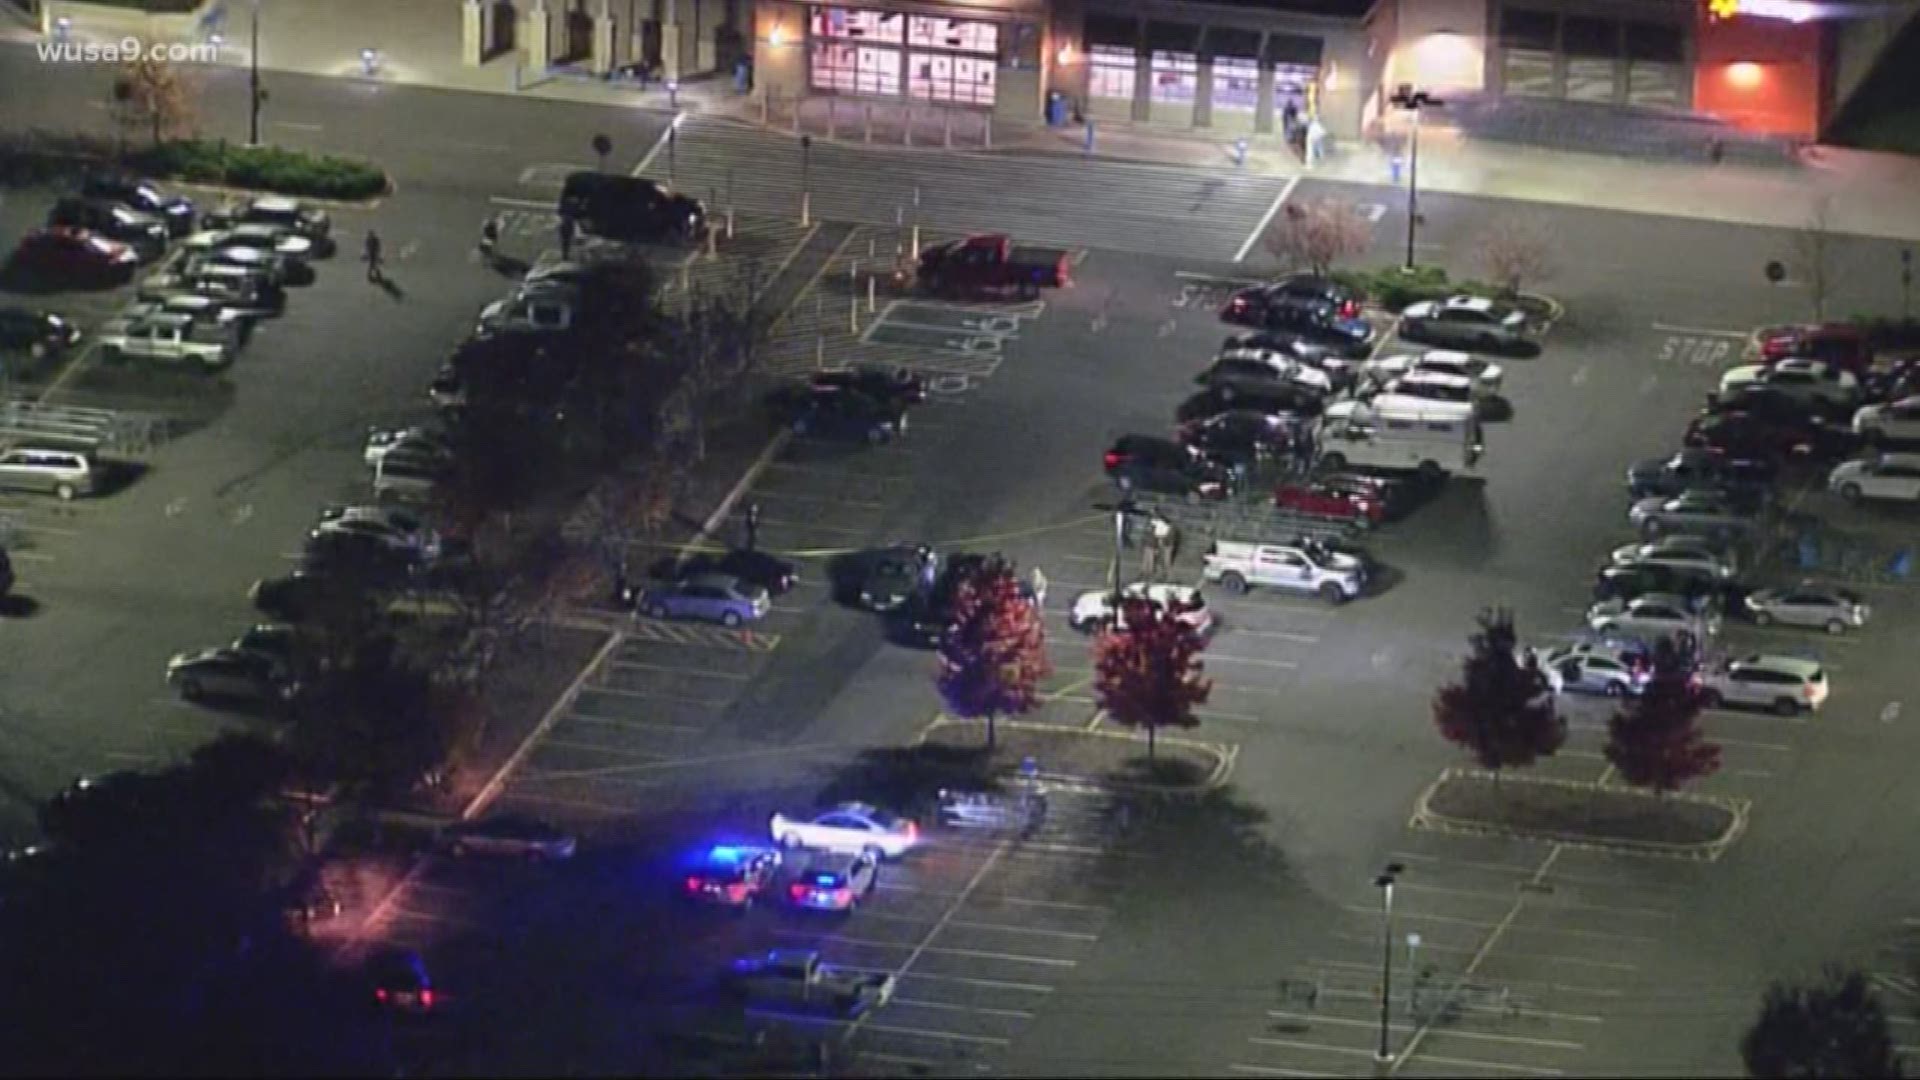 A man and a woman were shot in their car after an altercation outside of Walmart on Tuesday evening. Police say all suspects are in custody.